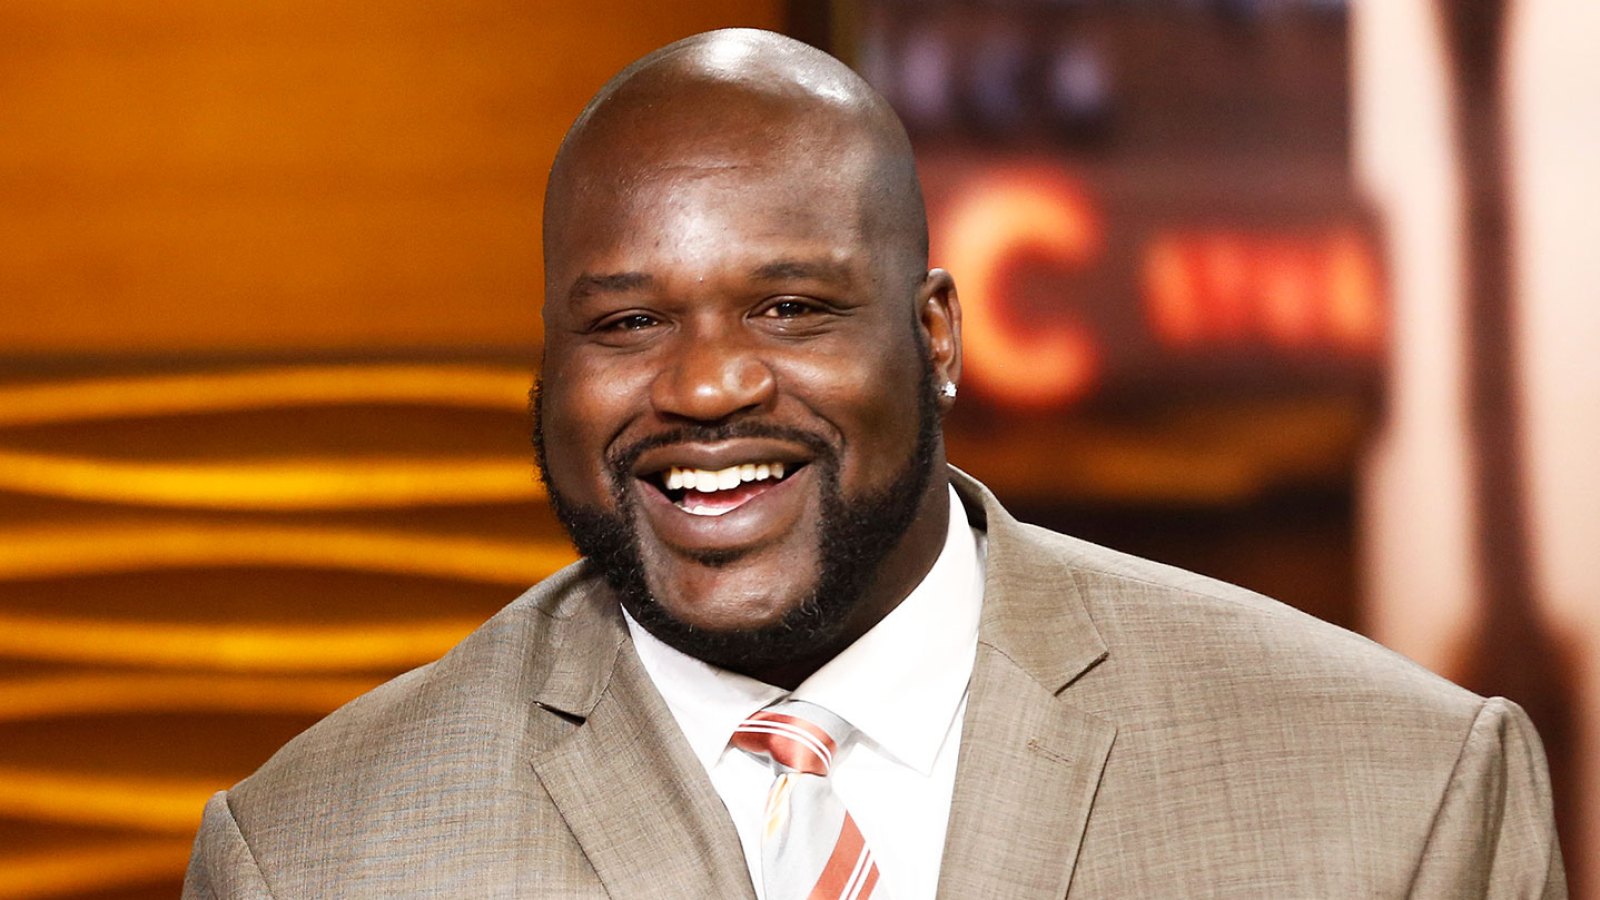 Shaquille O'Neal: 25 Things You Don't Know About Me